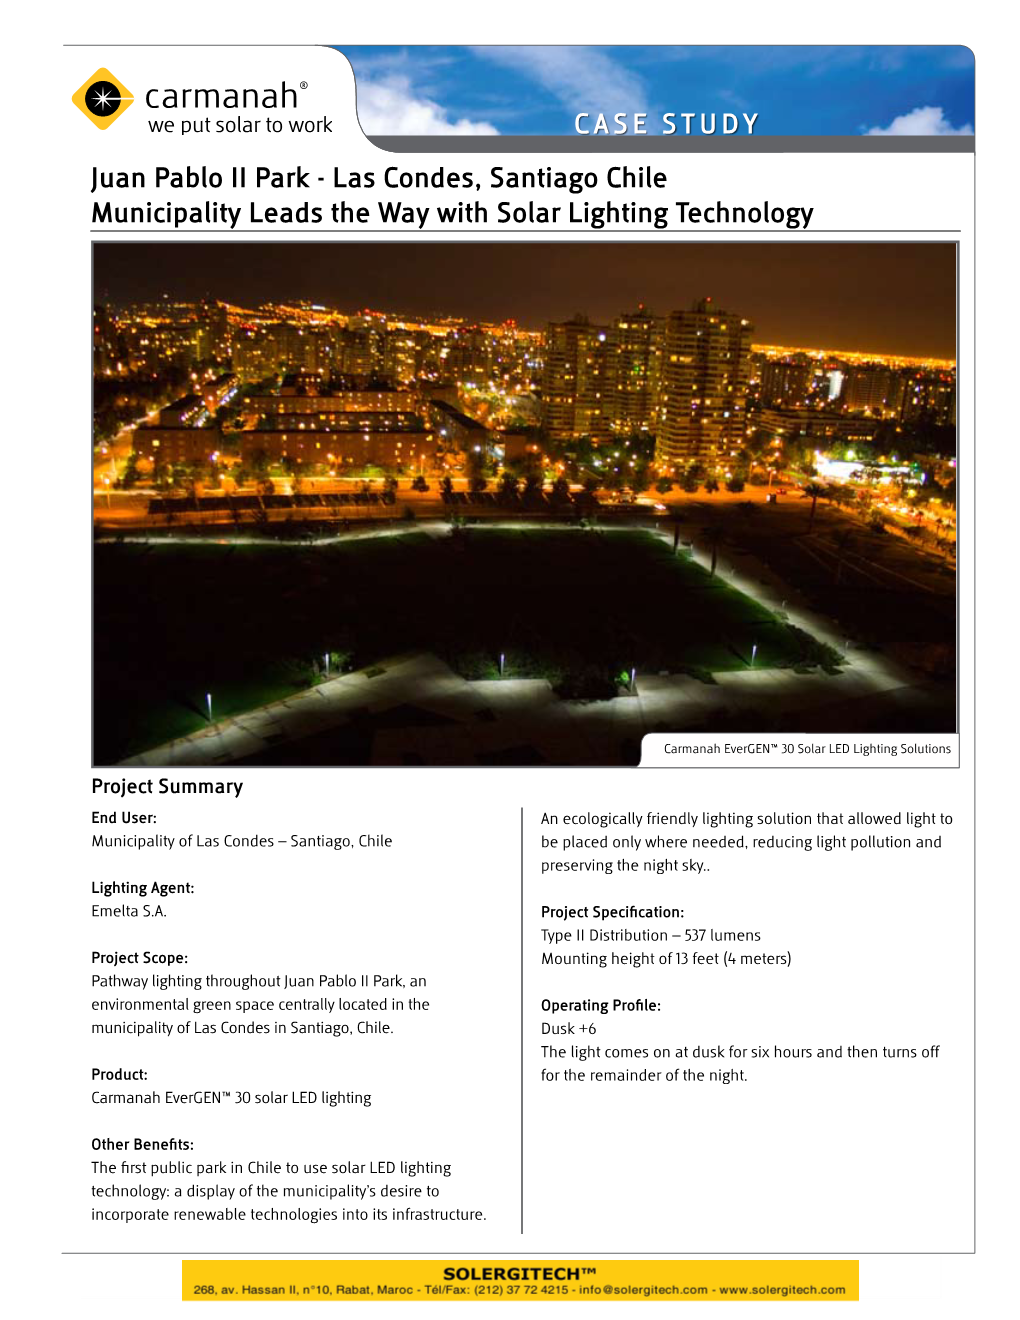 Las Condes, Santiago Chile Municipality Leads the Way with Solar Lighting Technology